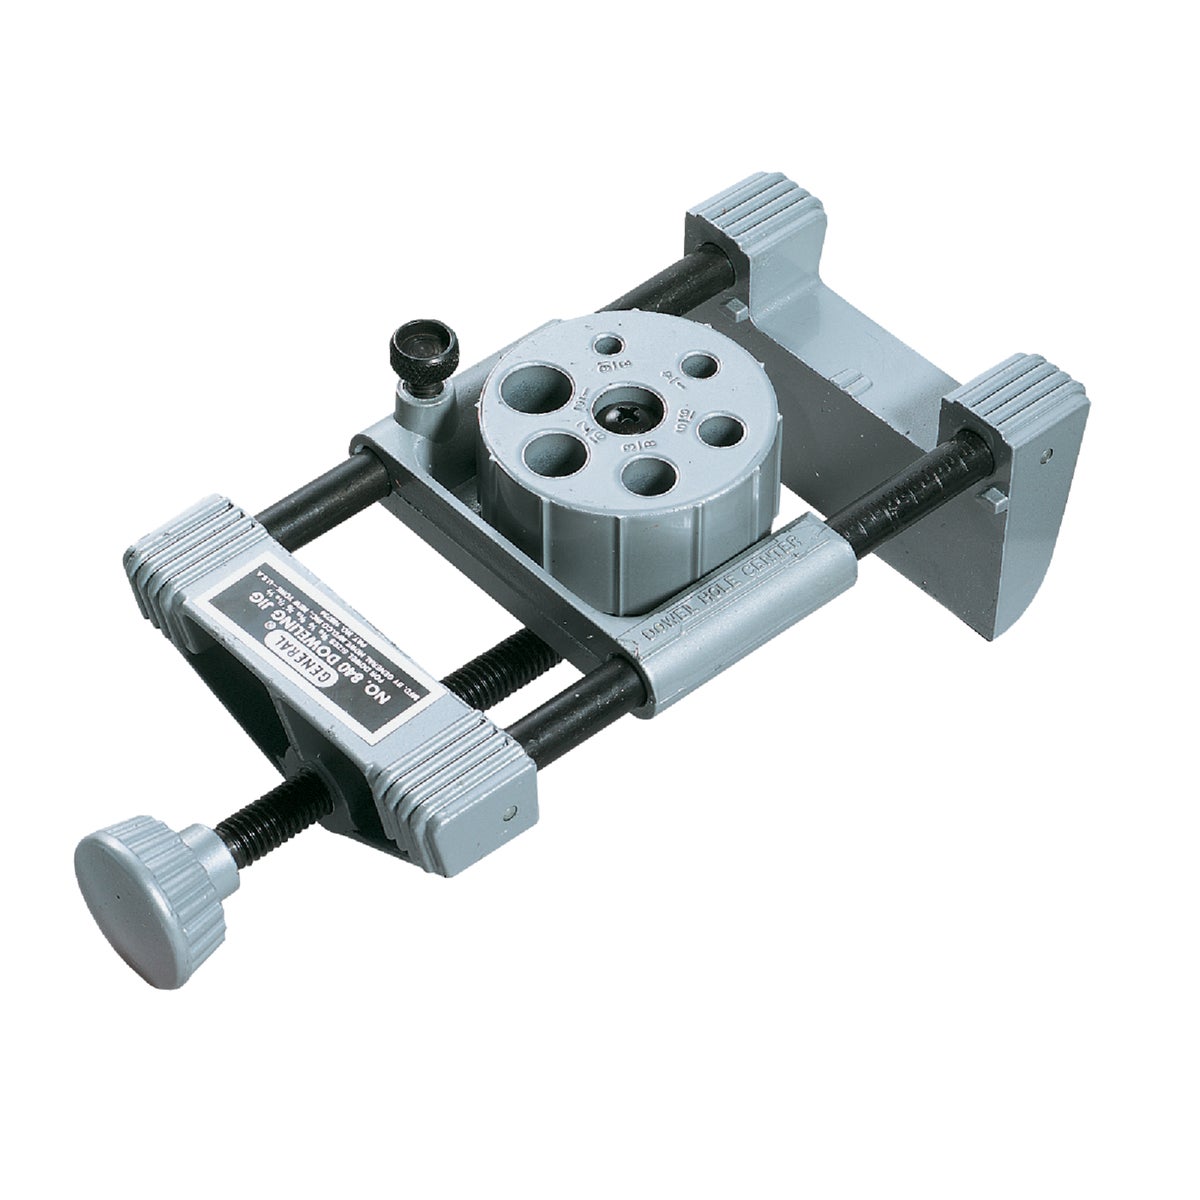 Item 345822, A precision jig that assures accurate line up of dowel holes in furniture 